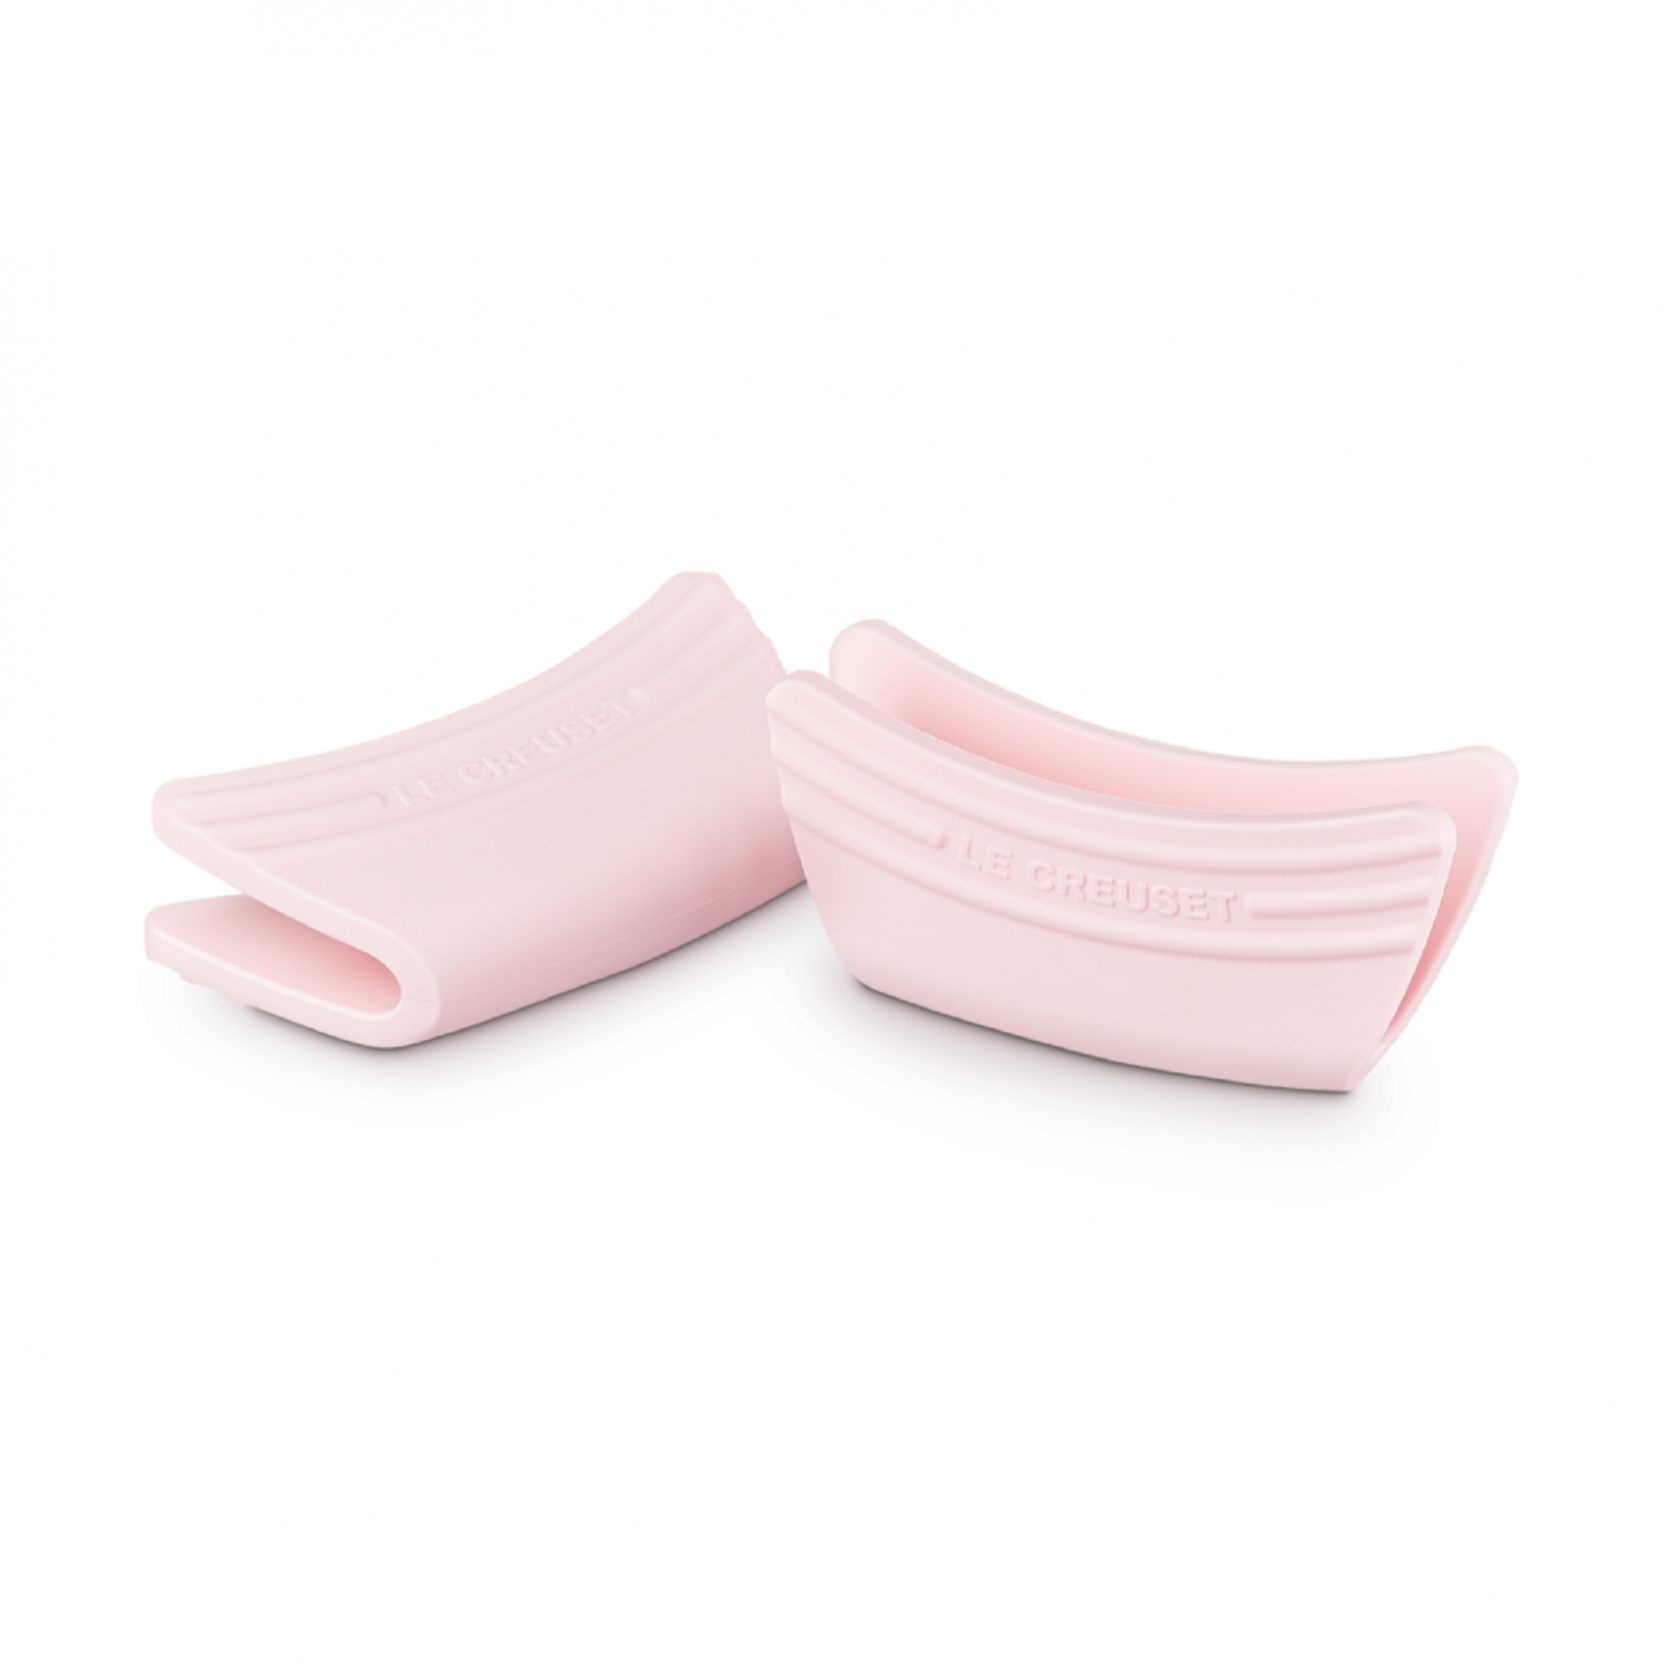 Le Creuset Set of 2 Handle Grips Shell Pink